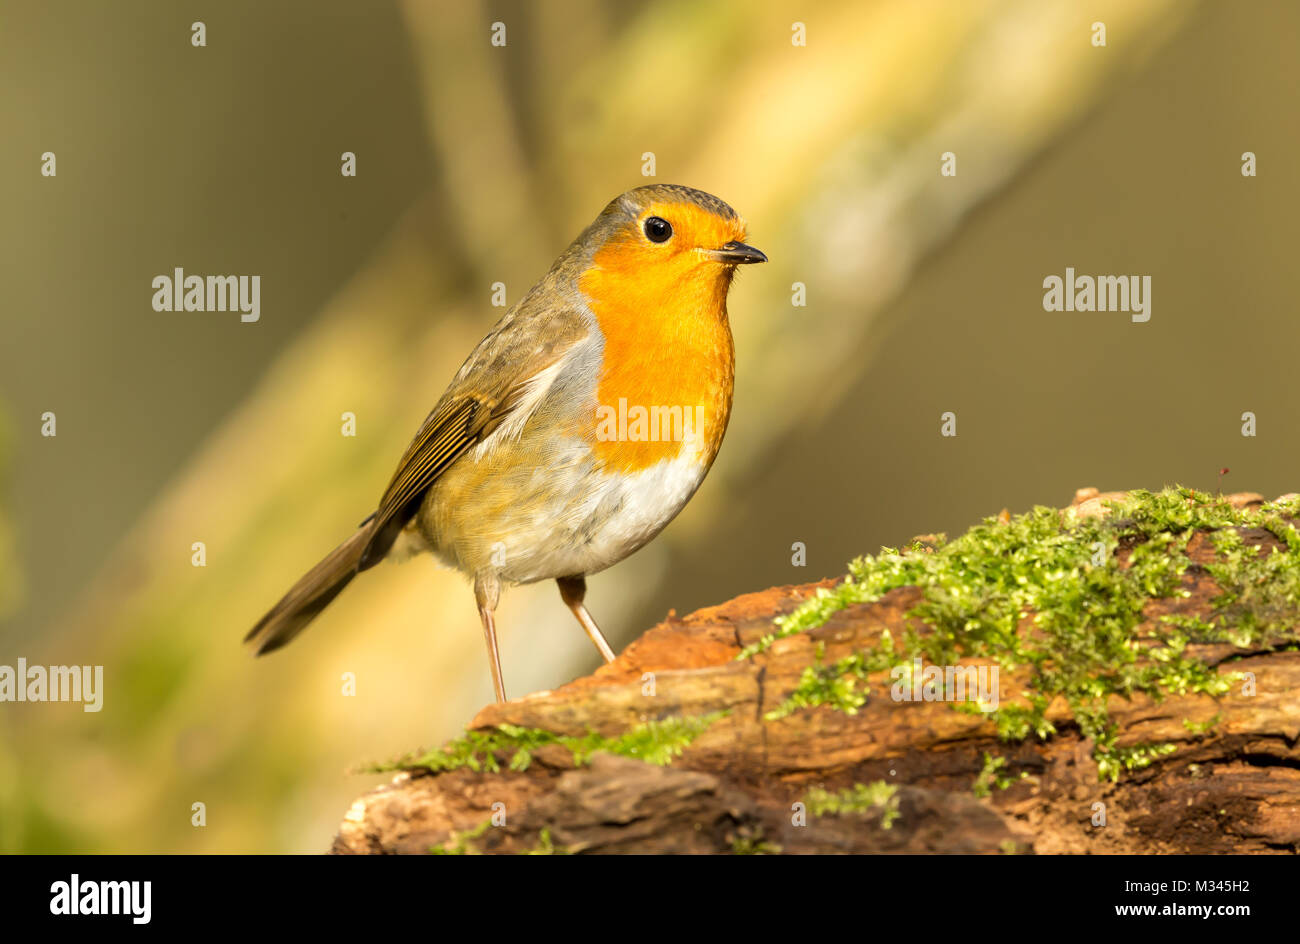 Robin Red Breast, Erithacus rubecula, on moss covered log with blurred background, landscape Stock Photo